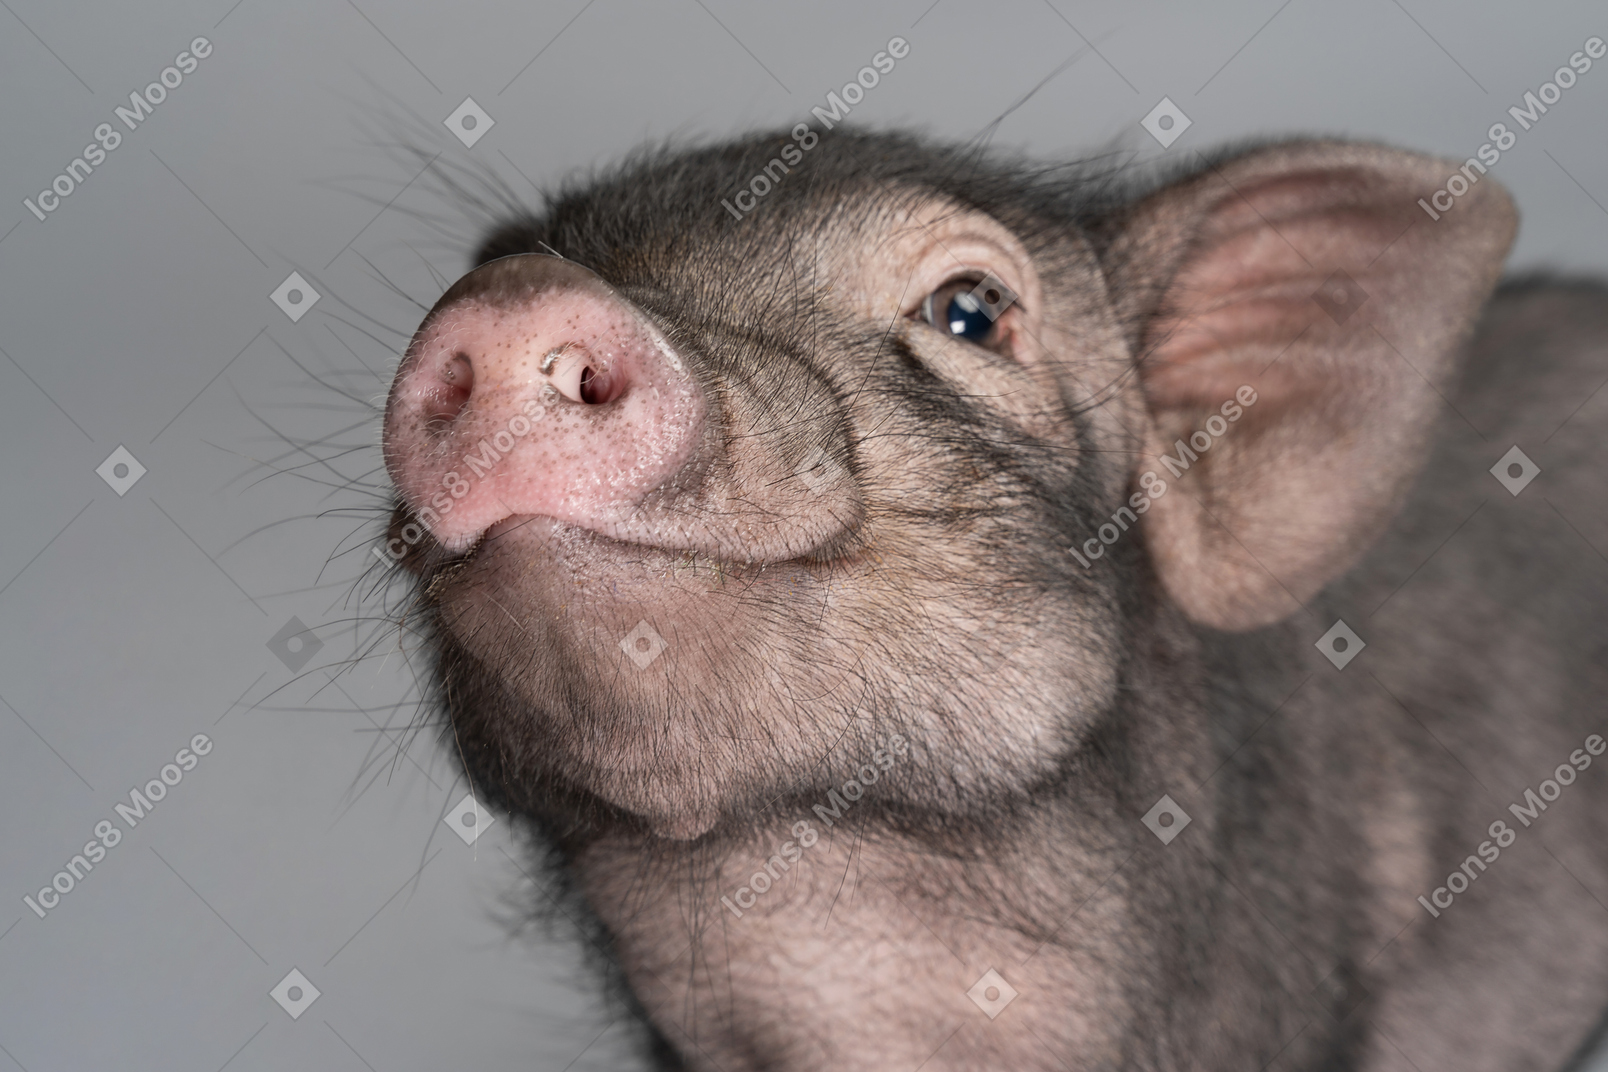 Cute little piglet looking at the camera